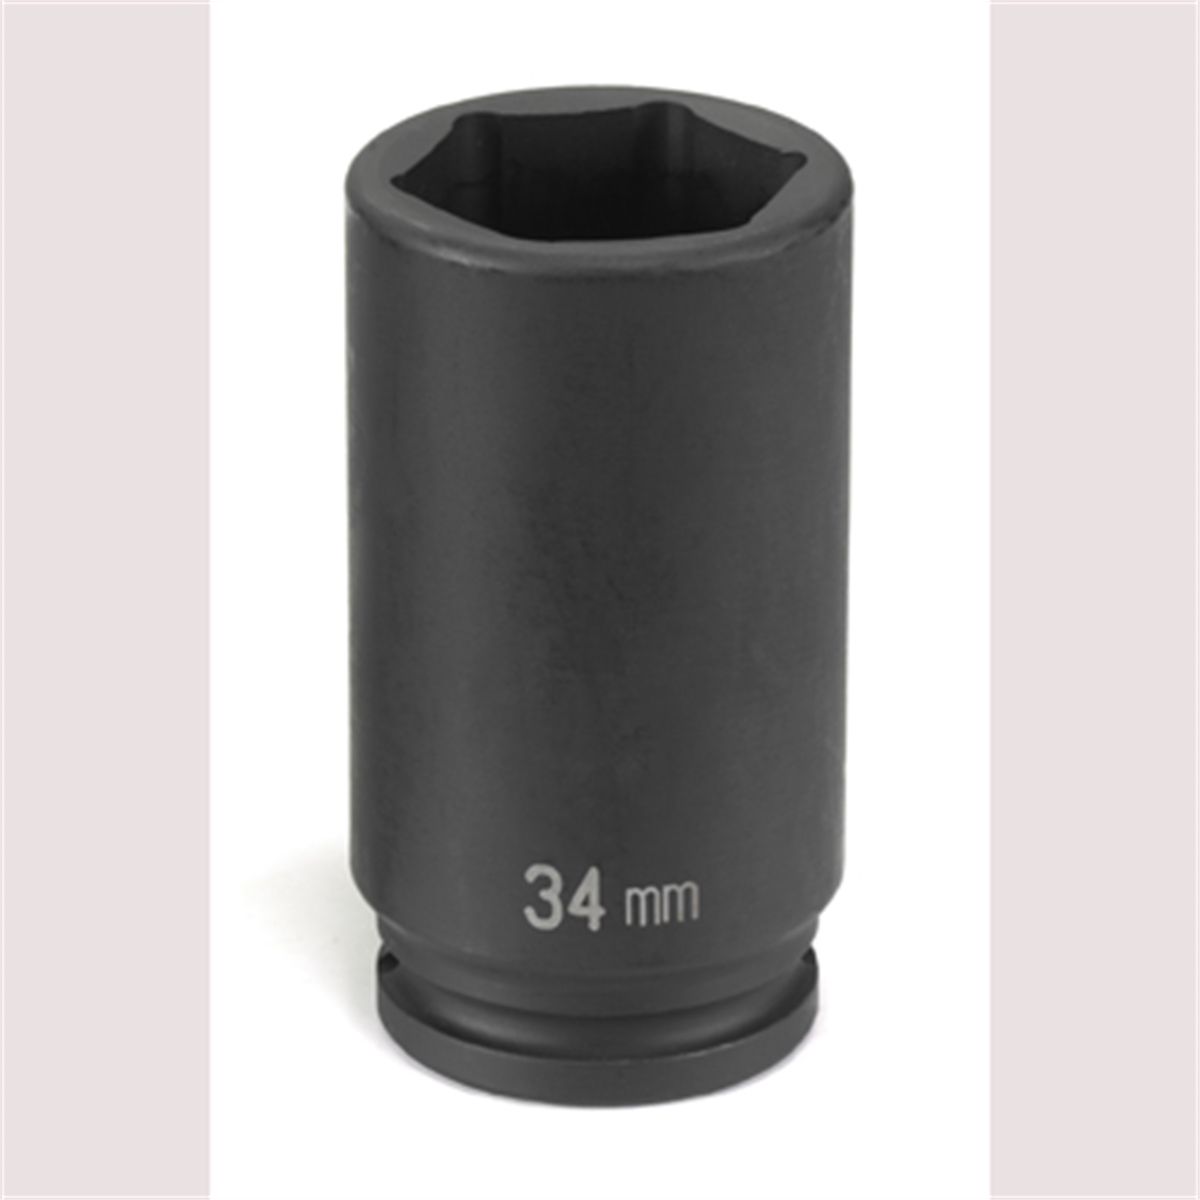 1/2" Drive x 34mm Deep Spindle Nut